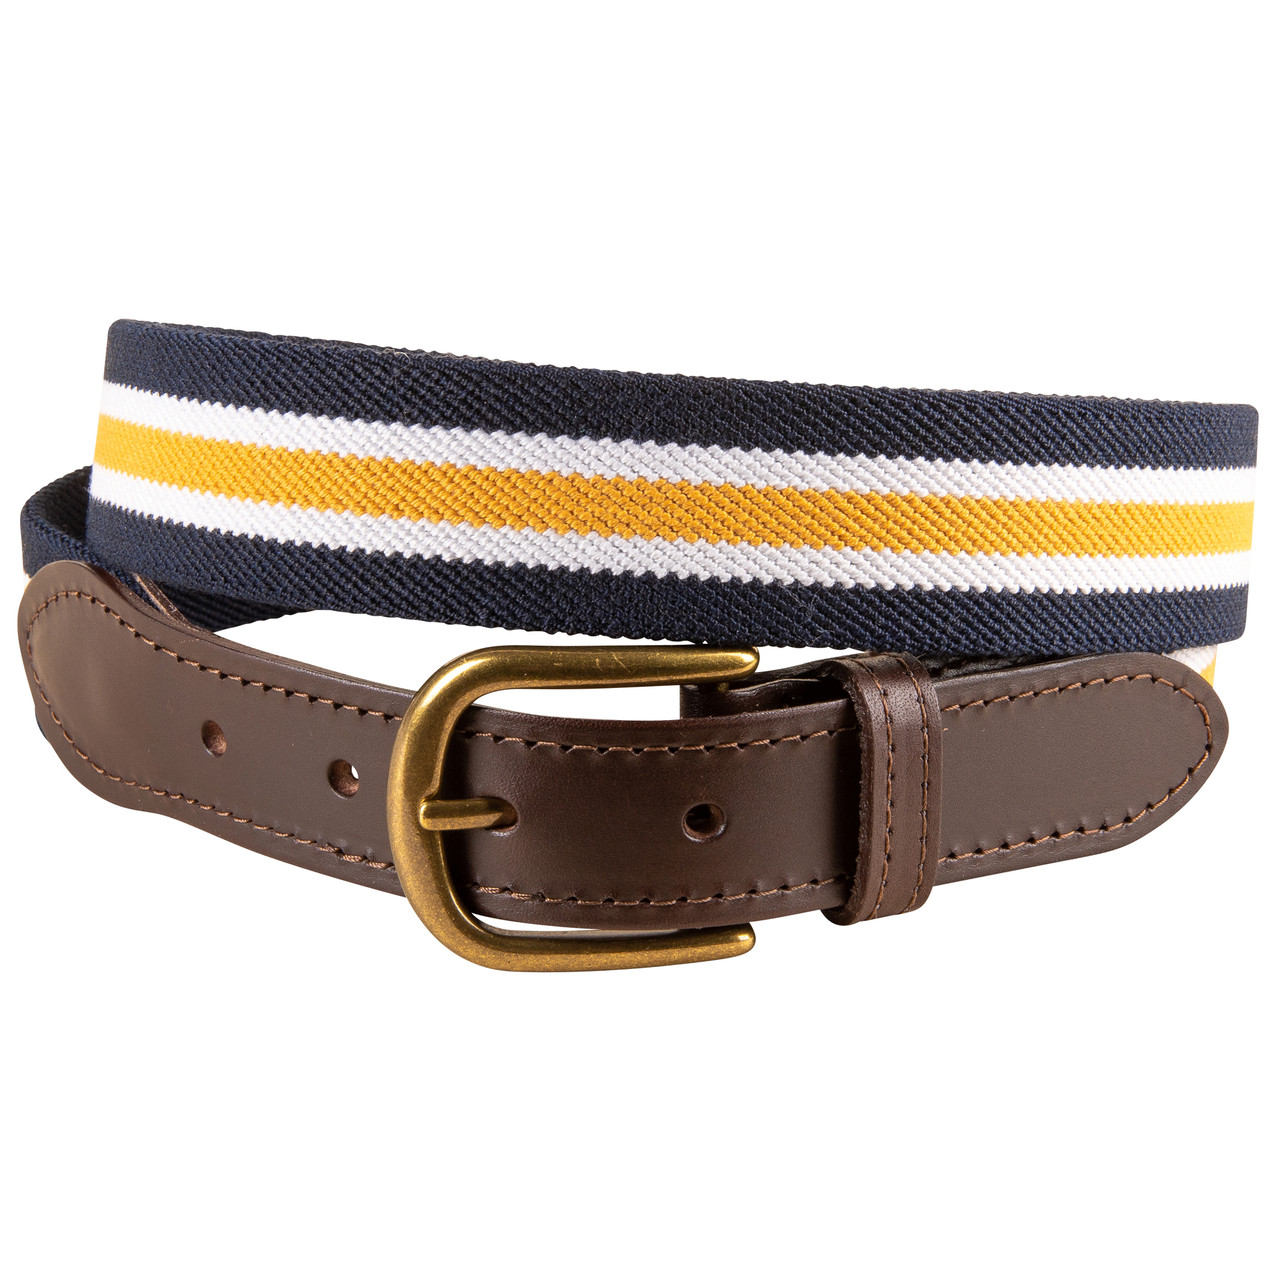 Woven Macrame Nautical Belts with Leather Tabs